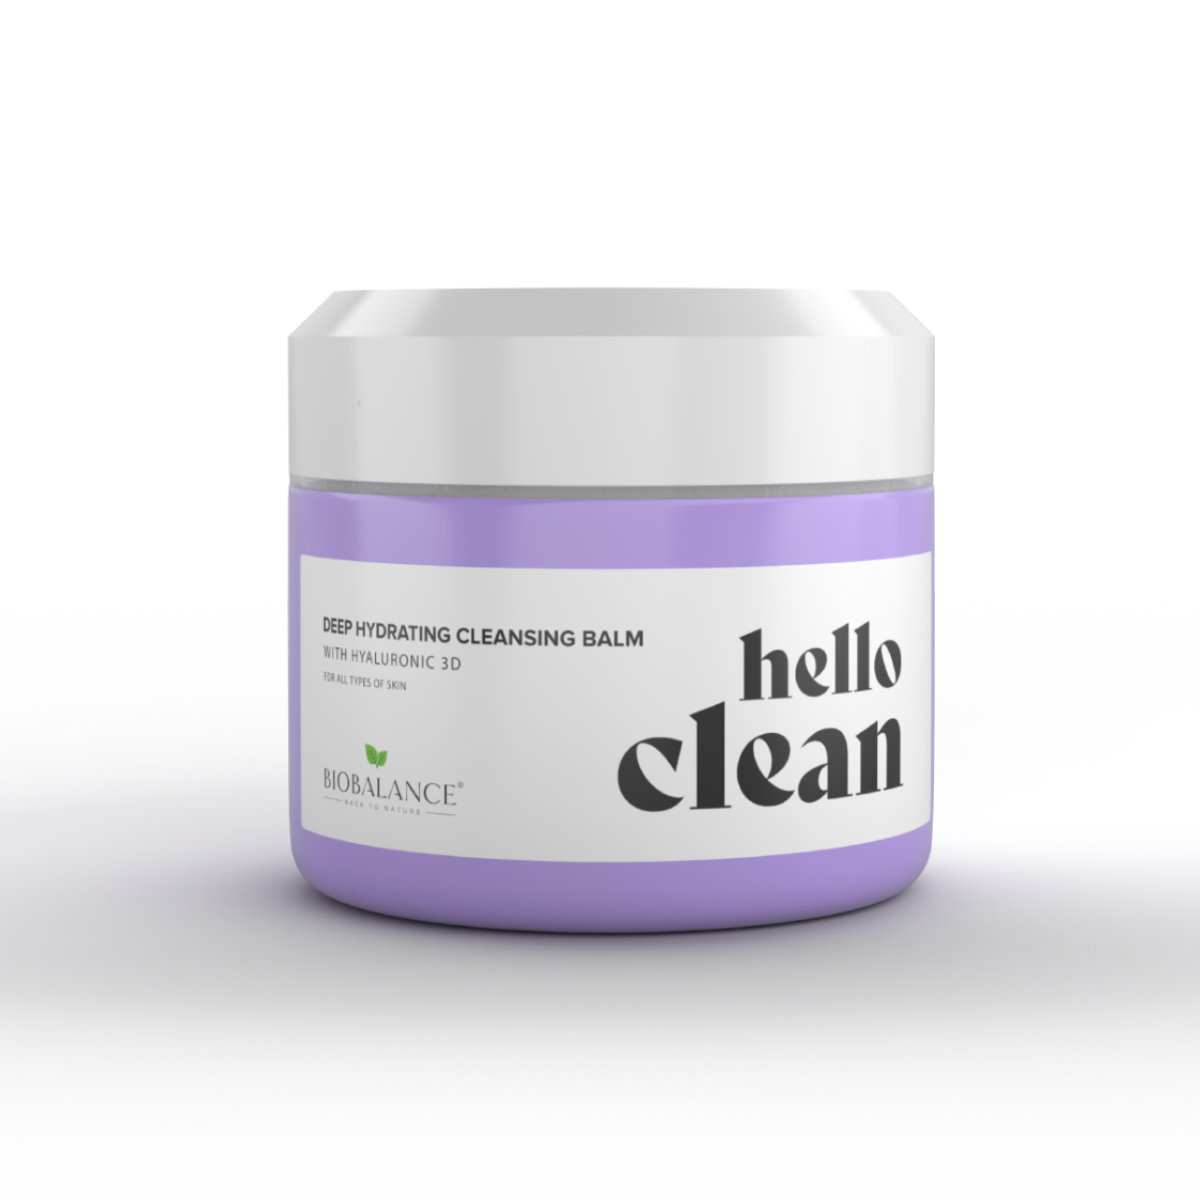 HYDRATING CLEANSING BALM